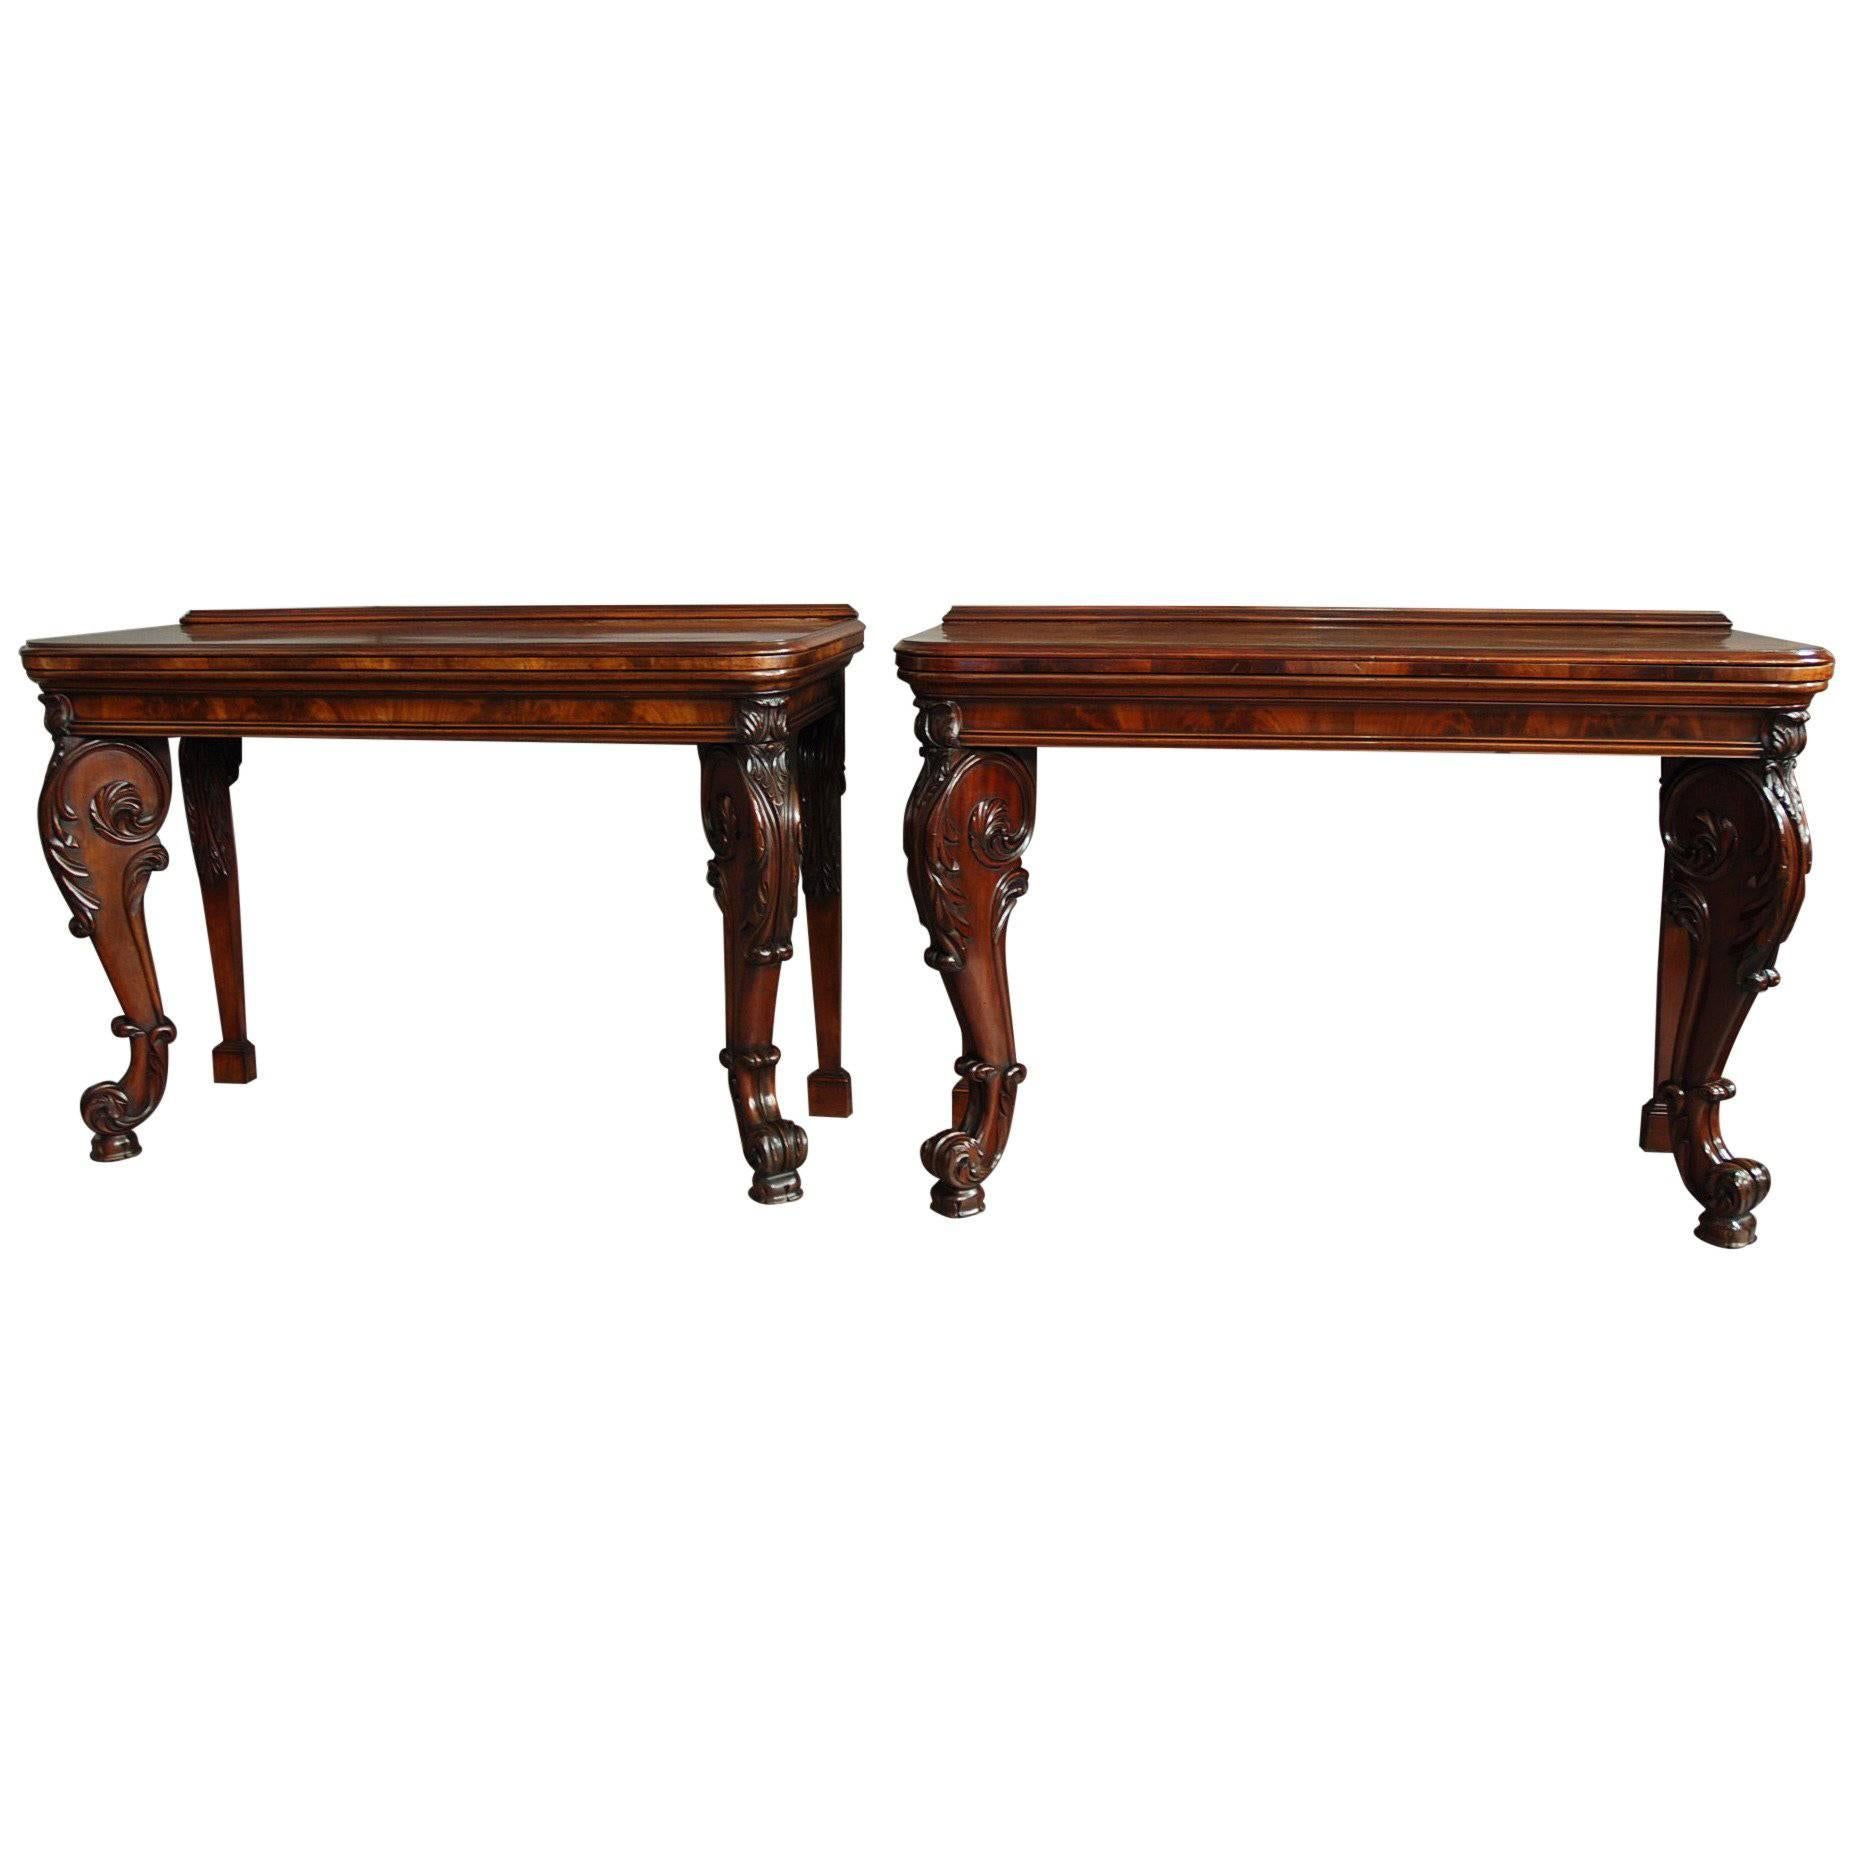 Pair of William IV Mahogany Console Tables in the Manner of Gillows